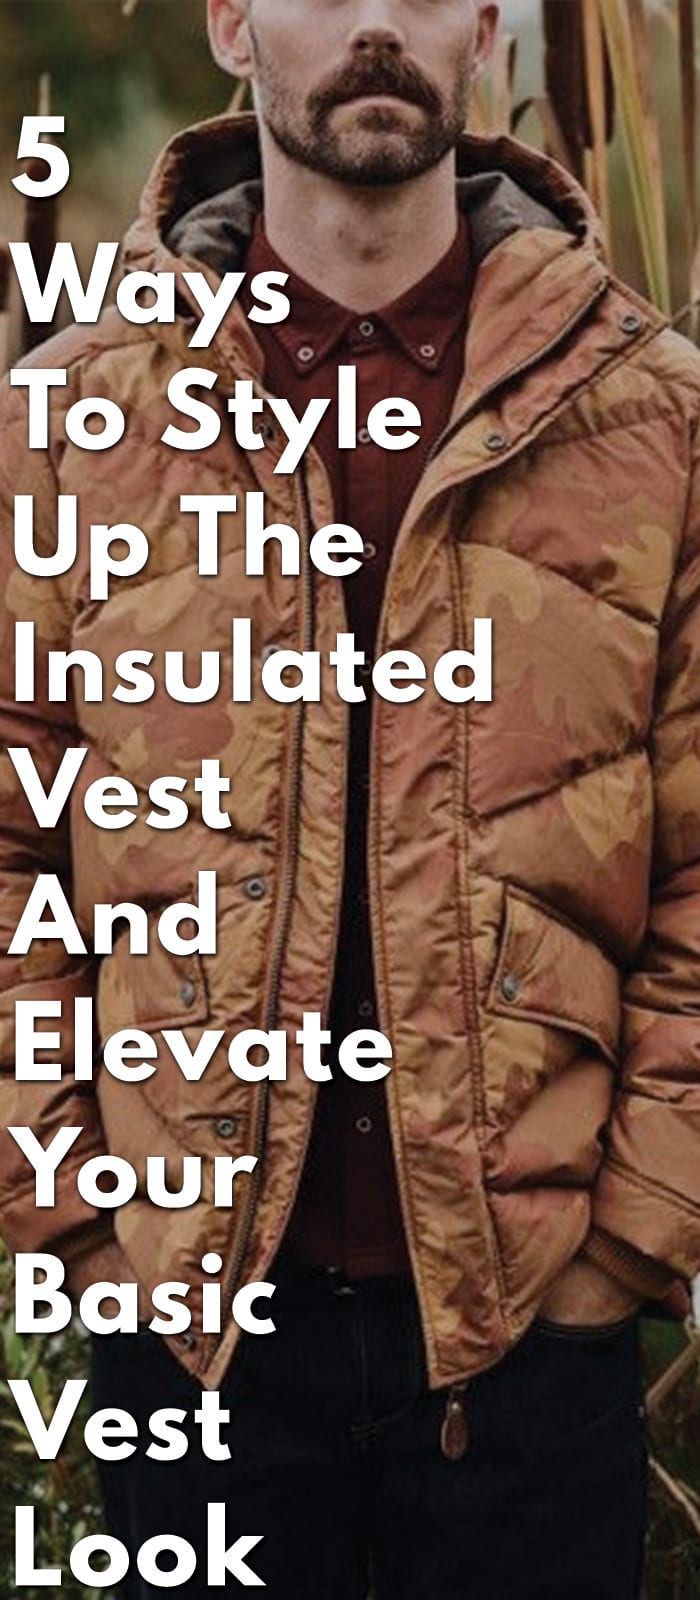 5-Ways-To-Style-Up-The-Insulated-Vest-And-Elevate-Your-Basic-Vest-Look